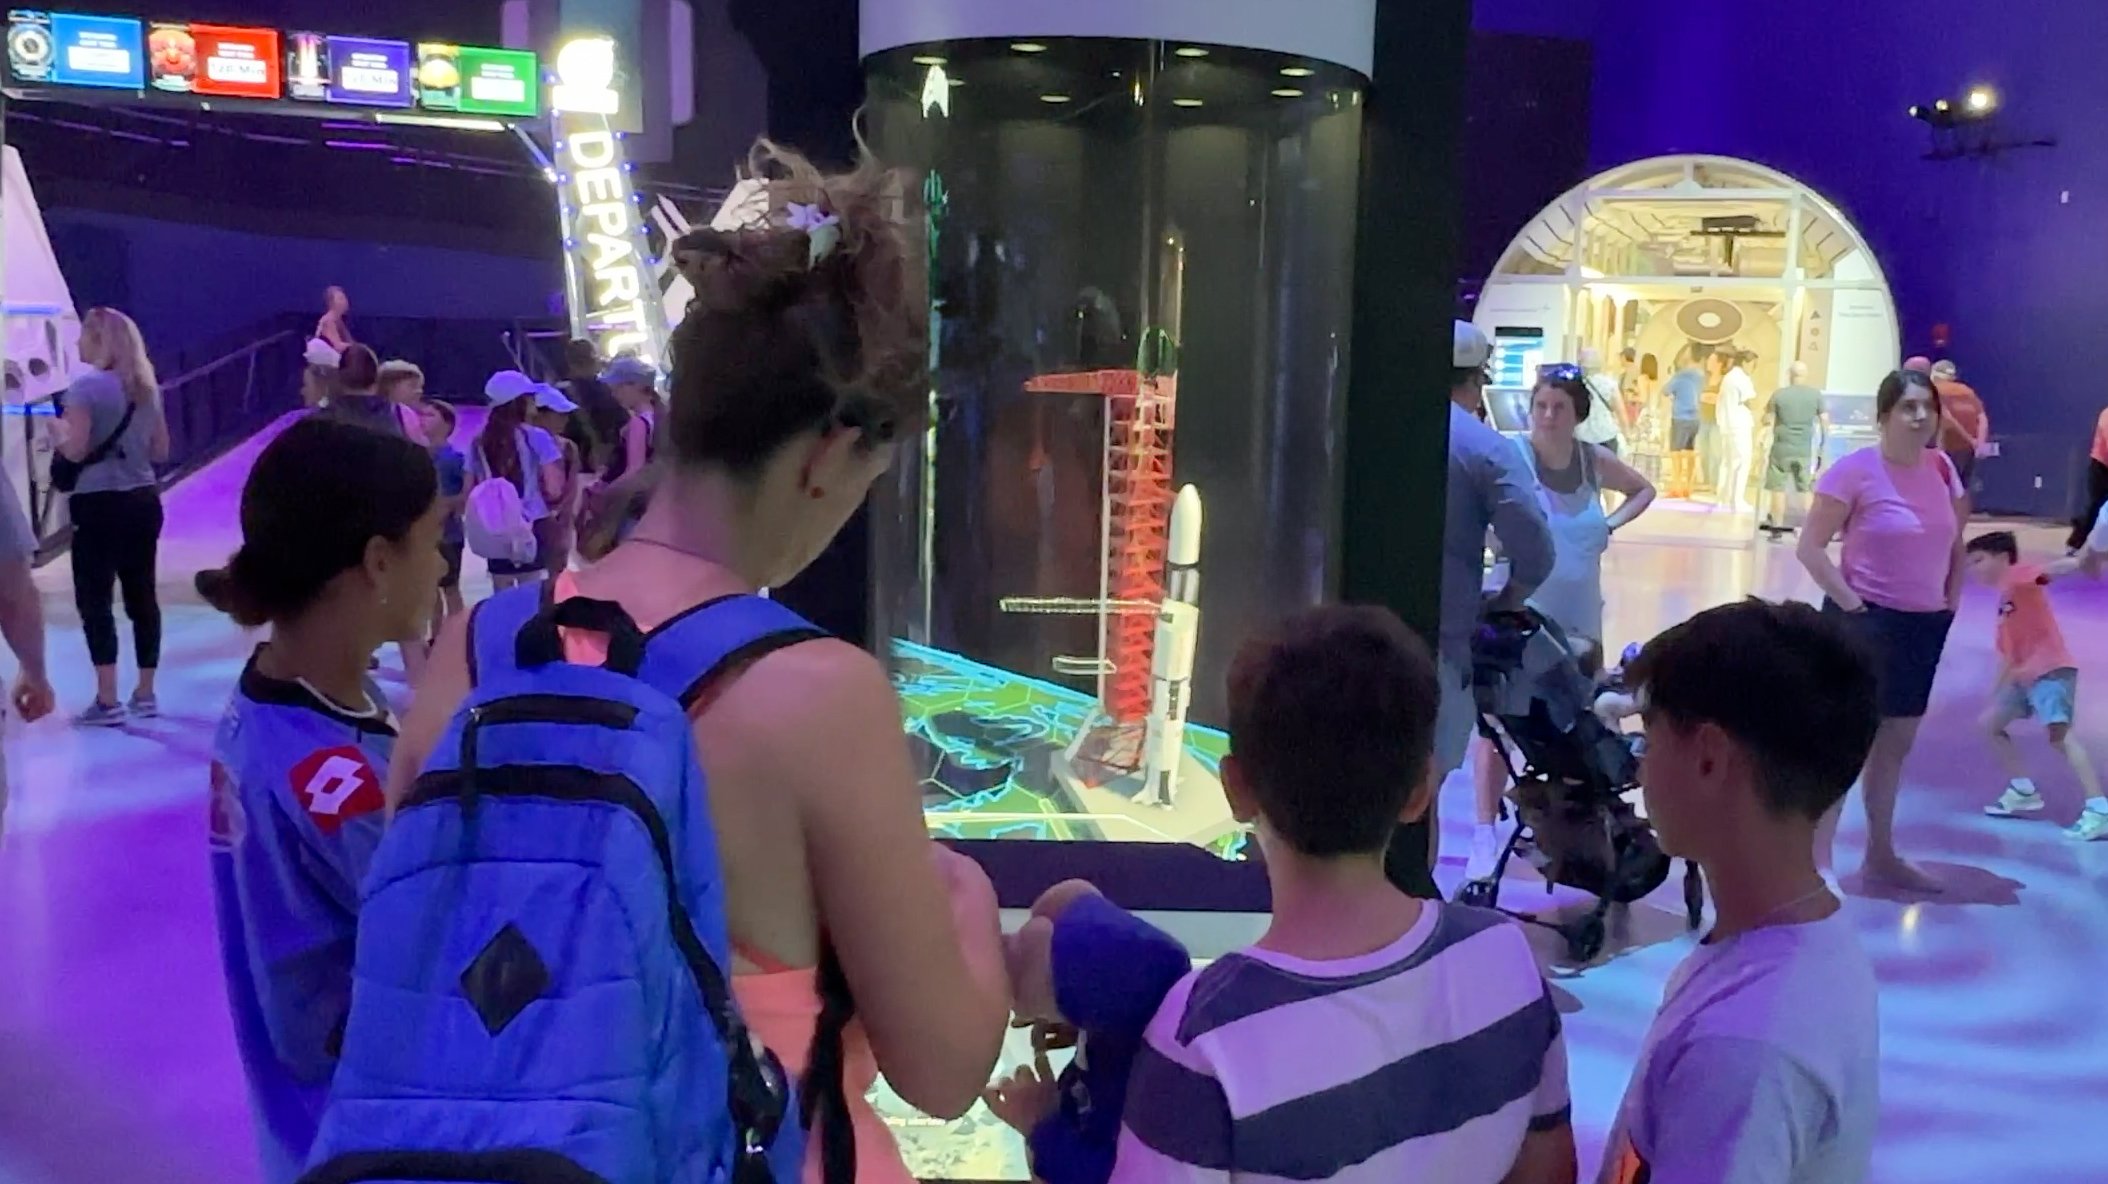    A young audience captivated by the holographic display of a rocket at the Kennedy Space Center.   